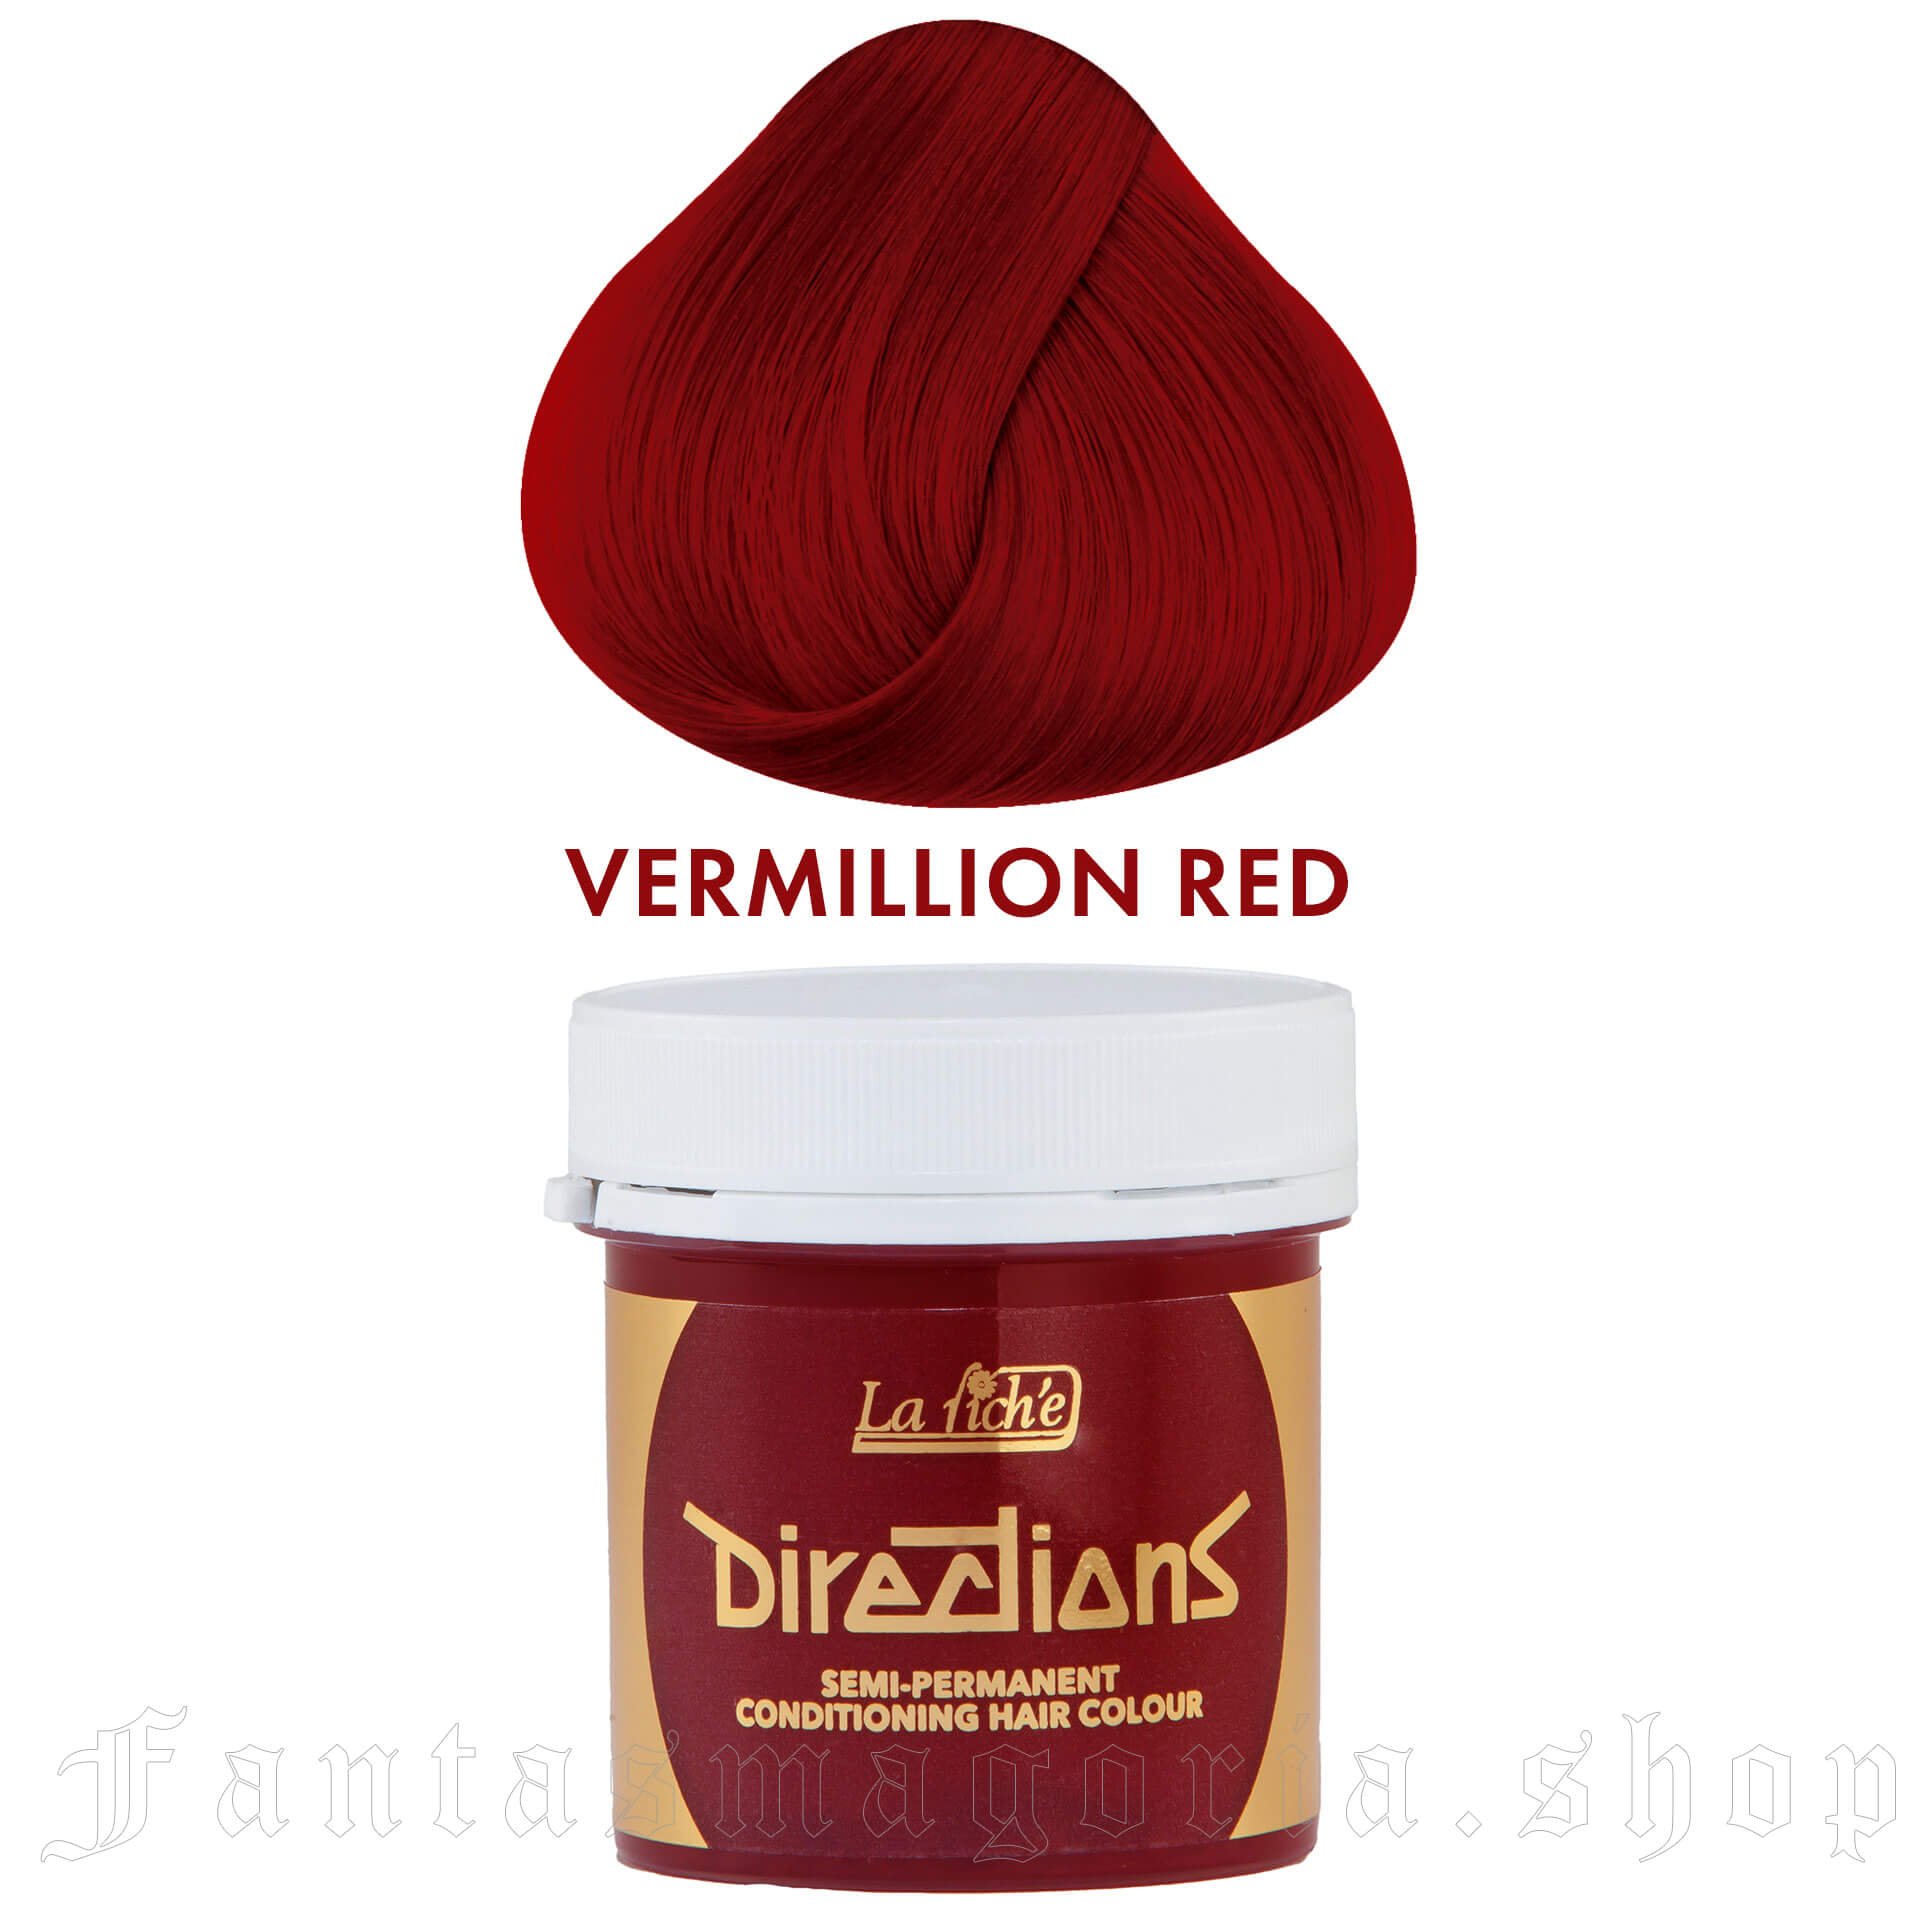 Vermillion Red Hair Coloring Balsam - Directions - DIRECTIONS/VERMILLION-RED 1